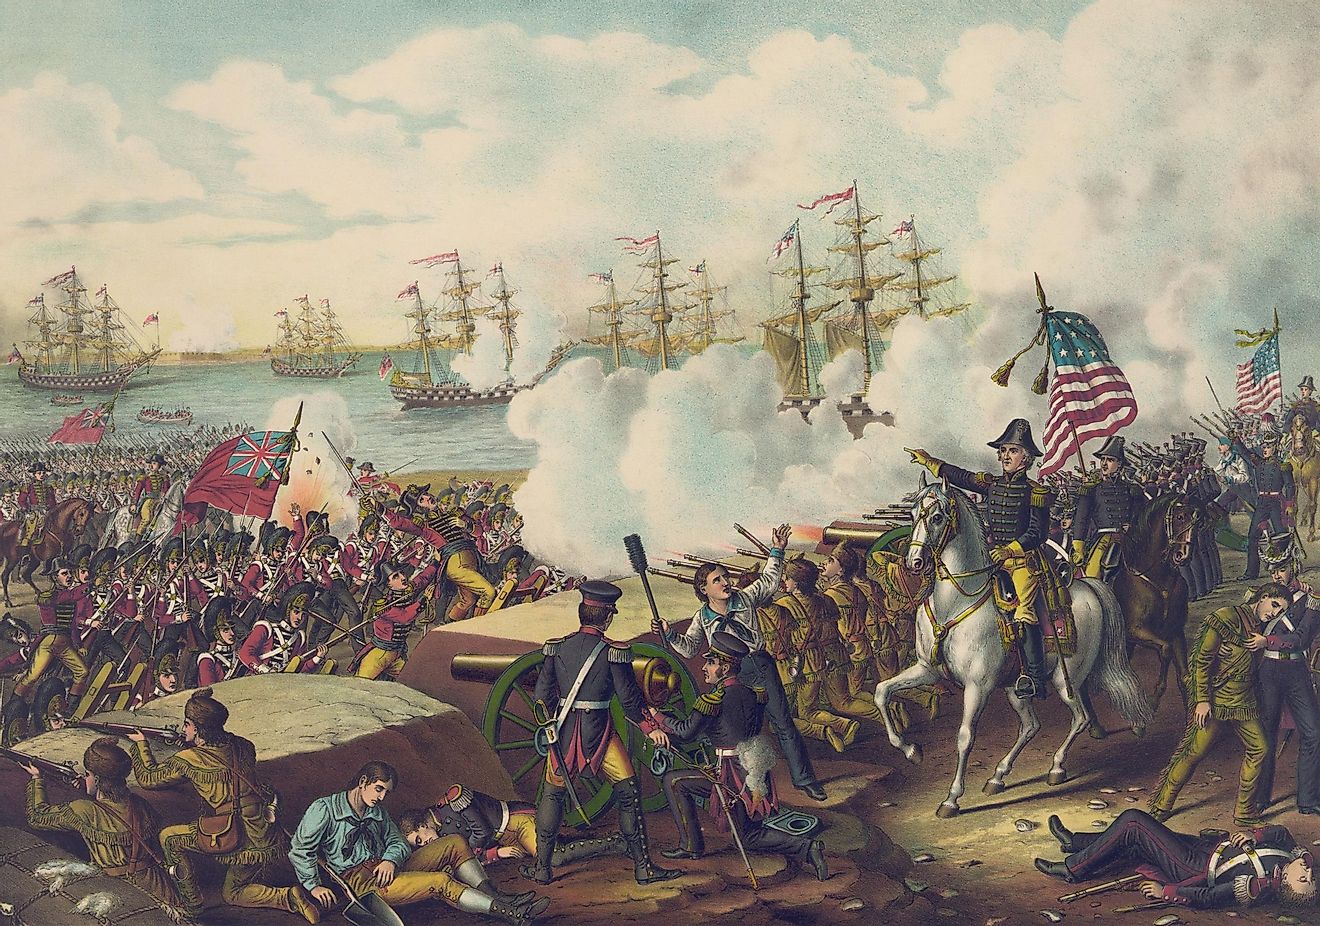 The War of 1812 happened when the two opposing sides, the United States on one, and the United Kingdom on the other, could no longer agree about their views on US independence. Image credit: Everett Historical / Shutterstock.com